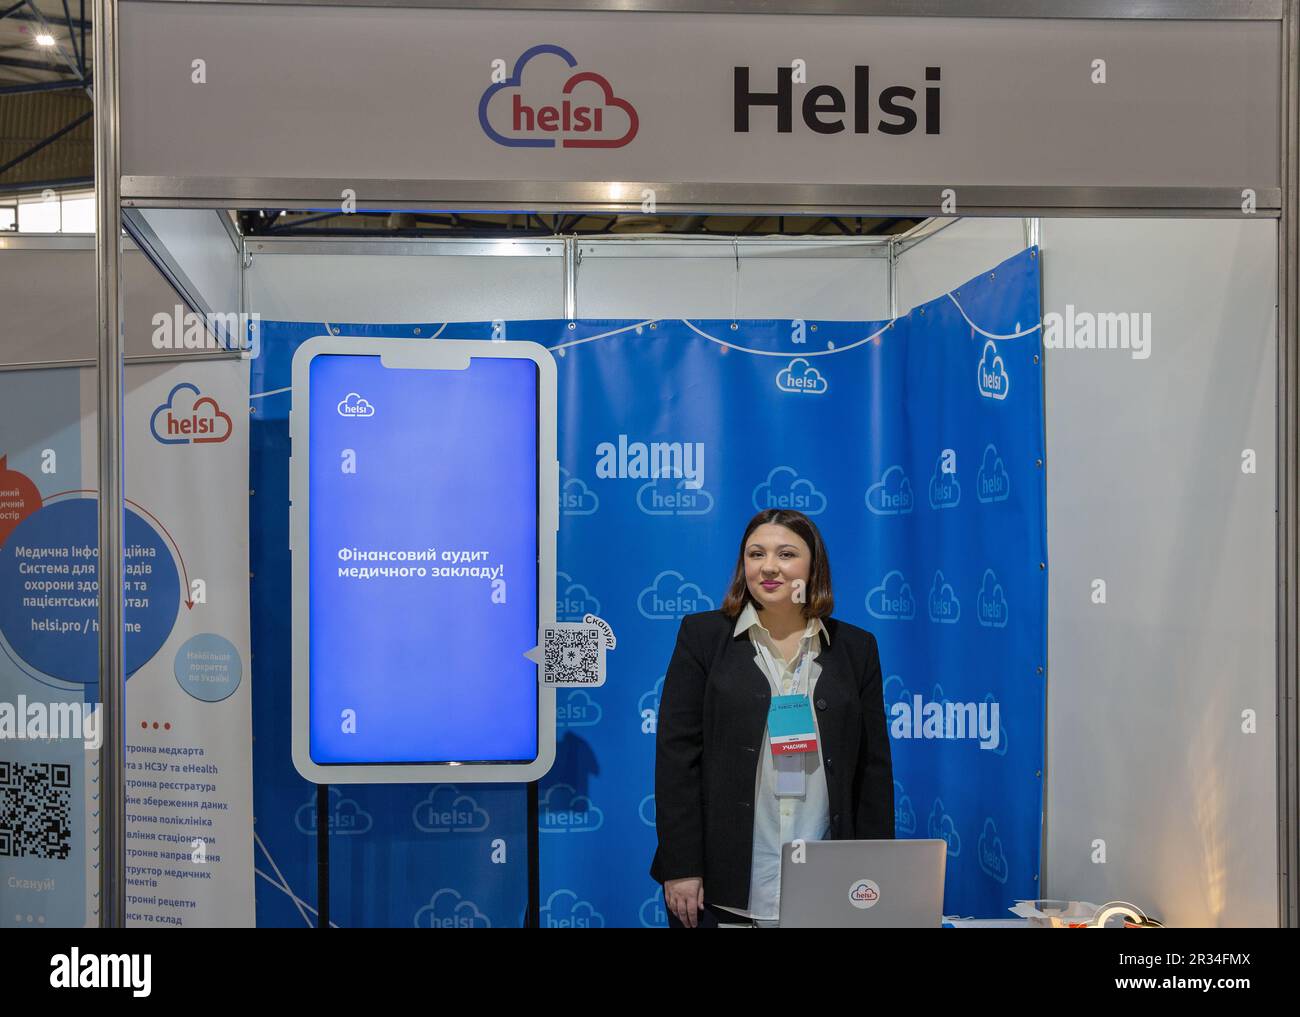 Kyiv, Ukraine - March 29, 2023: Presenter works on Helsi booth at exhibition in MVC. It is a modern Ukrainian electronic medical system for patients, Stock Photo